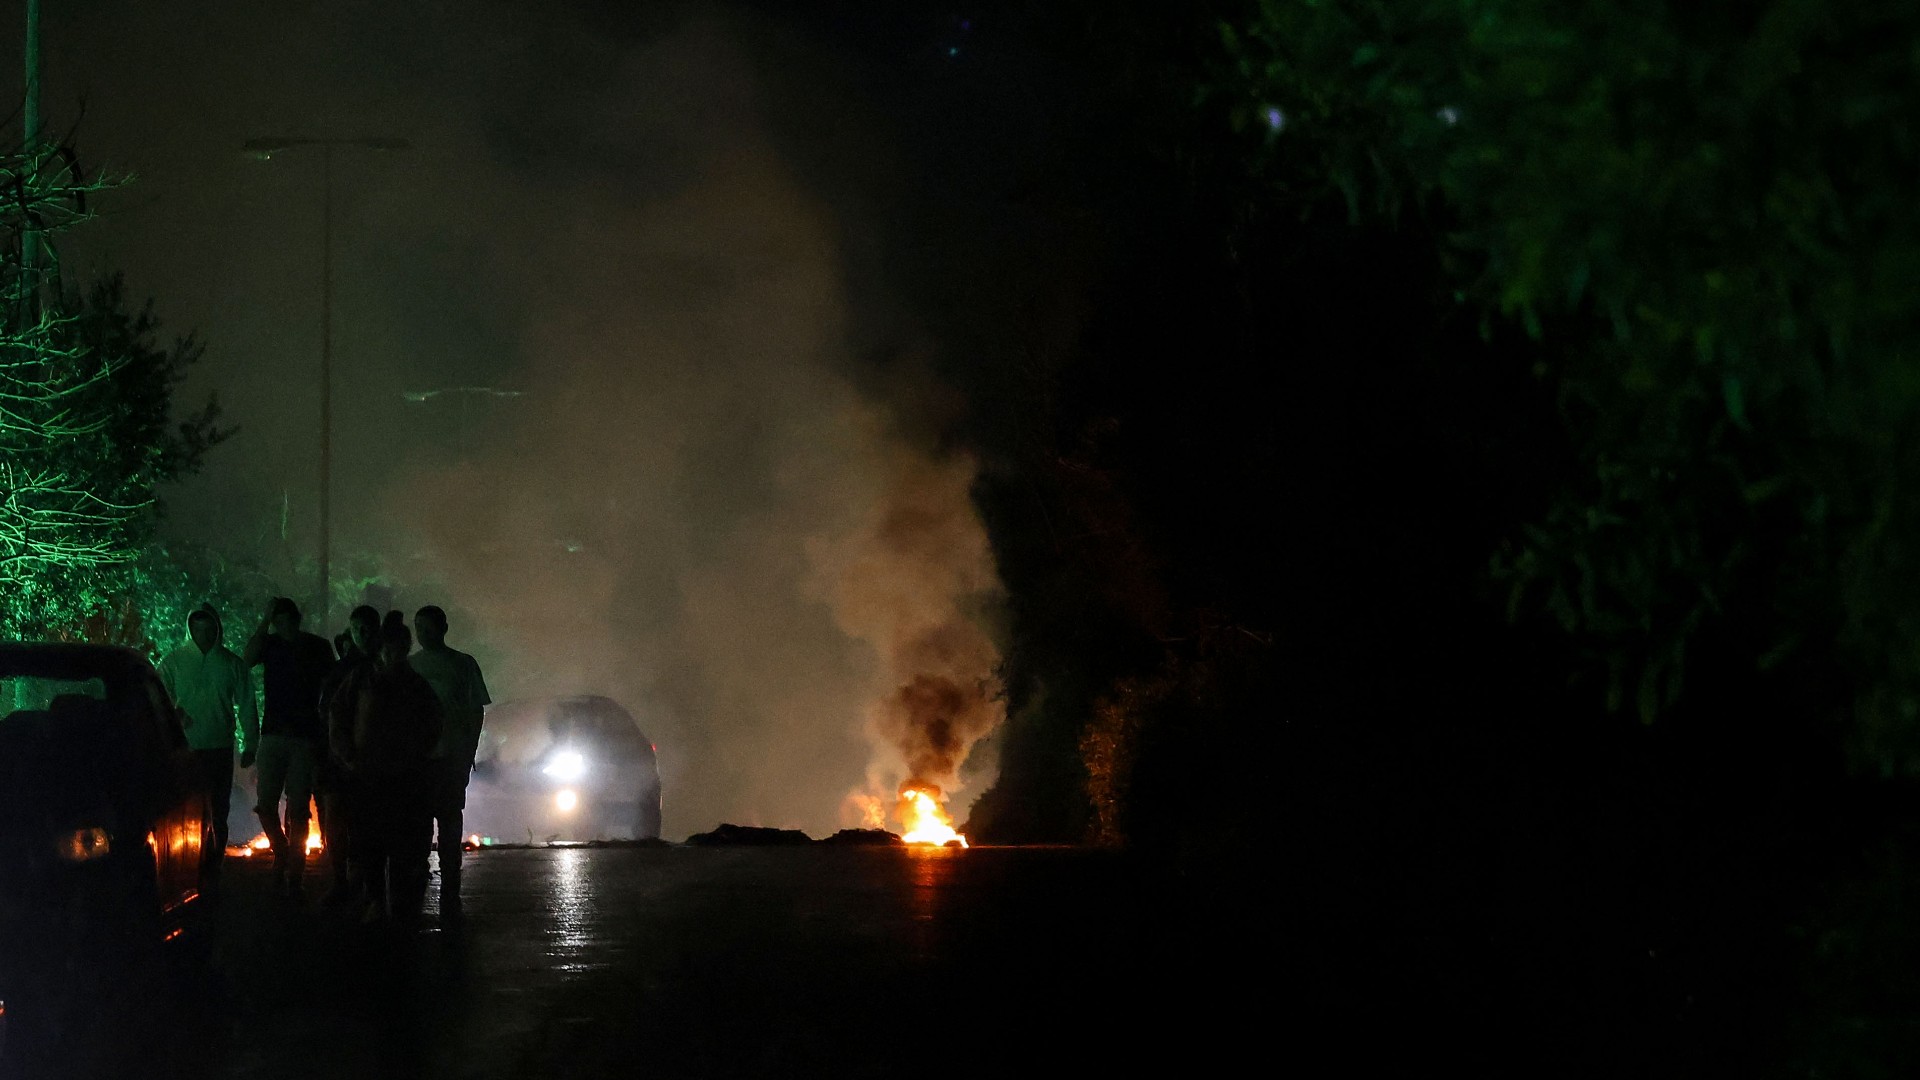 Partisans of the Christian Lebanese Forces burn rubble on the side of a road to protest the killing of Pascal Sleiman in the Jbeil area, on 8 April (AFP/Joseph Eid)